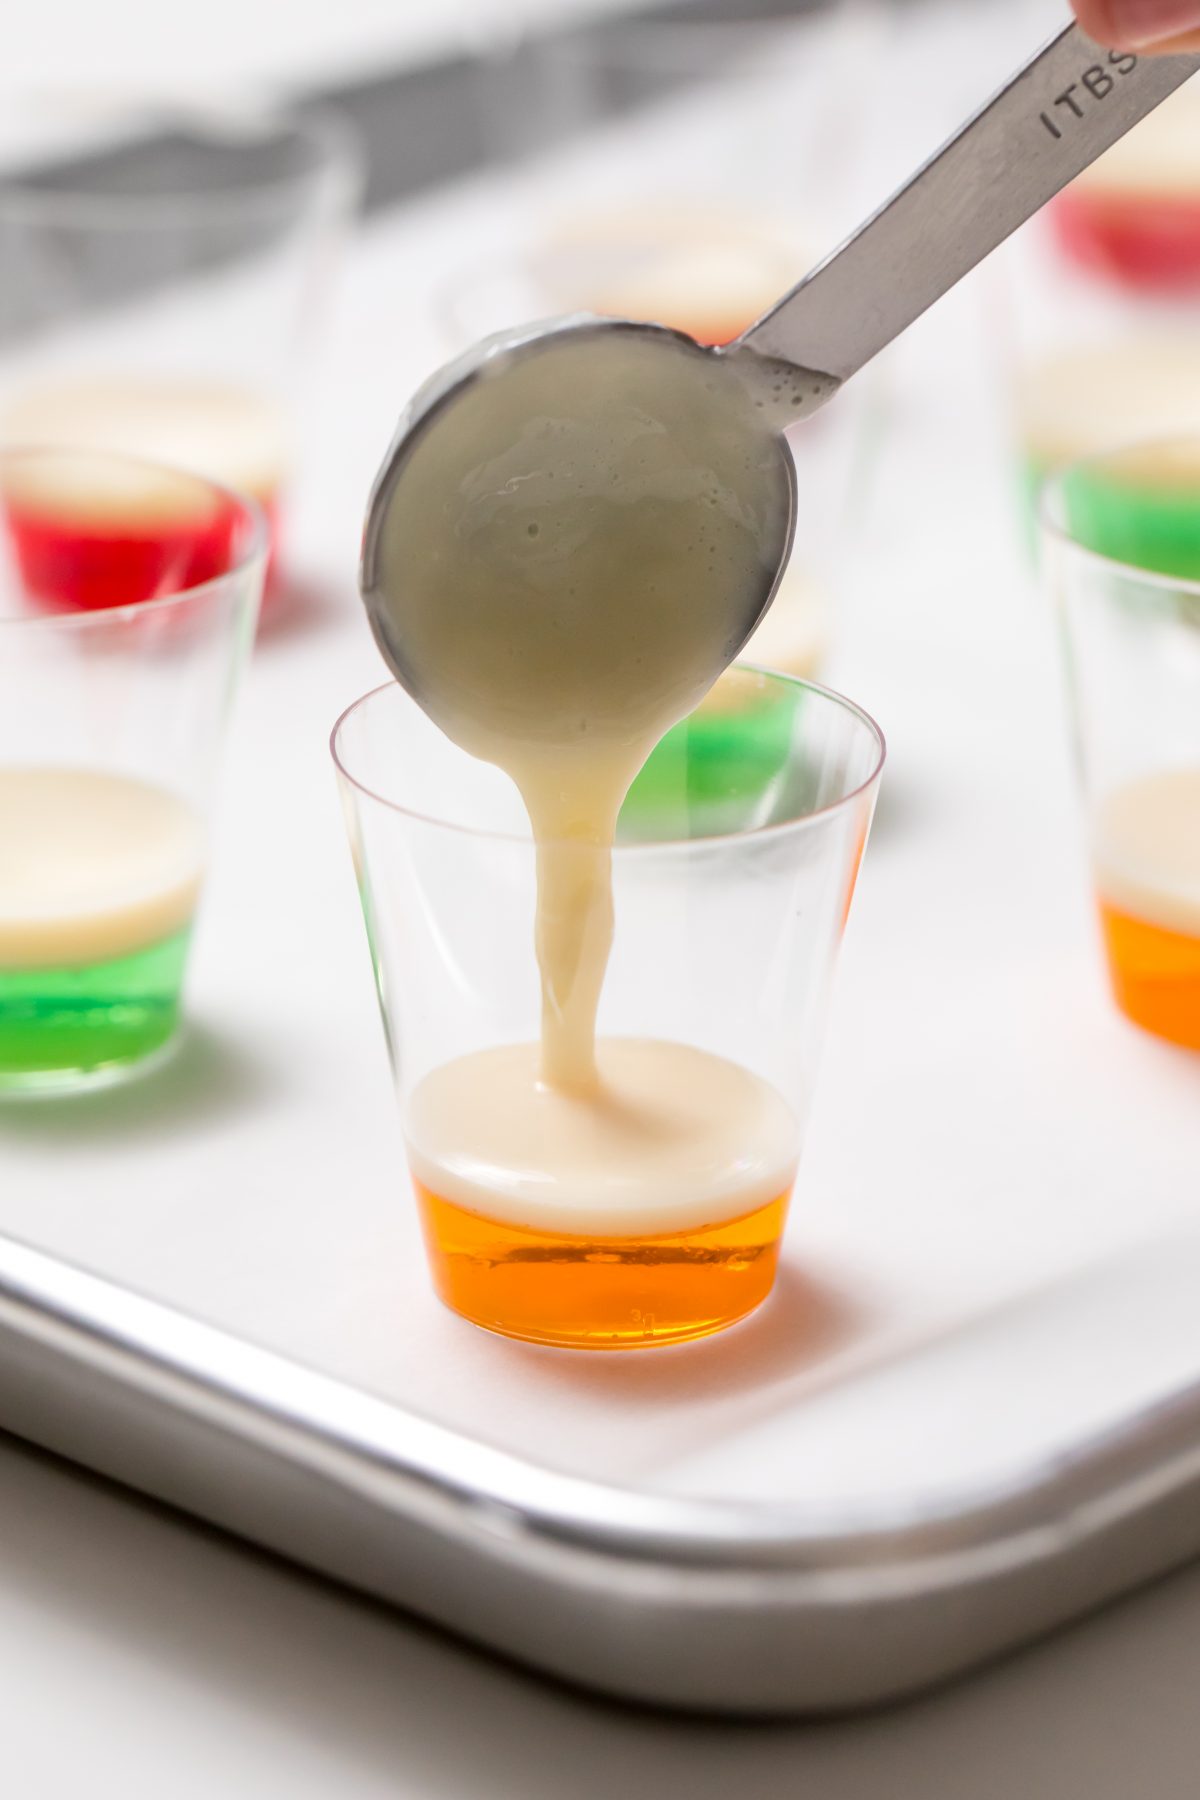 Layer Jell-O and sweetened condensed milk gelatin in shot glasses